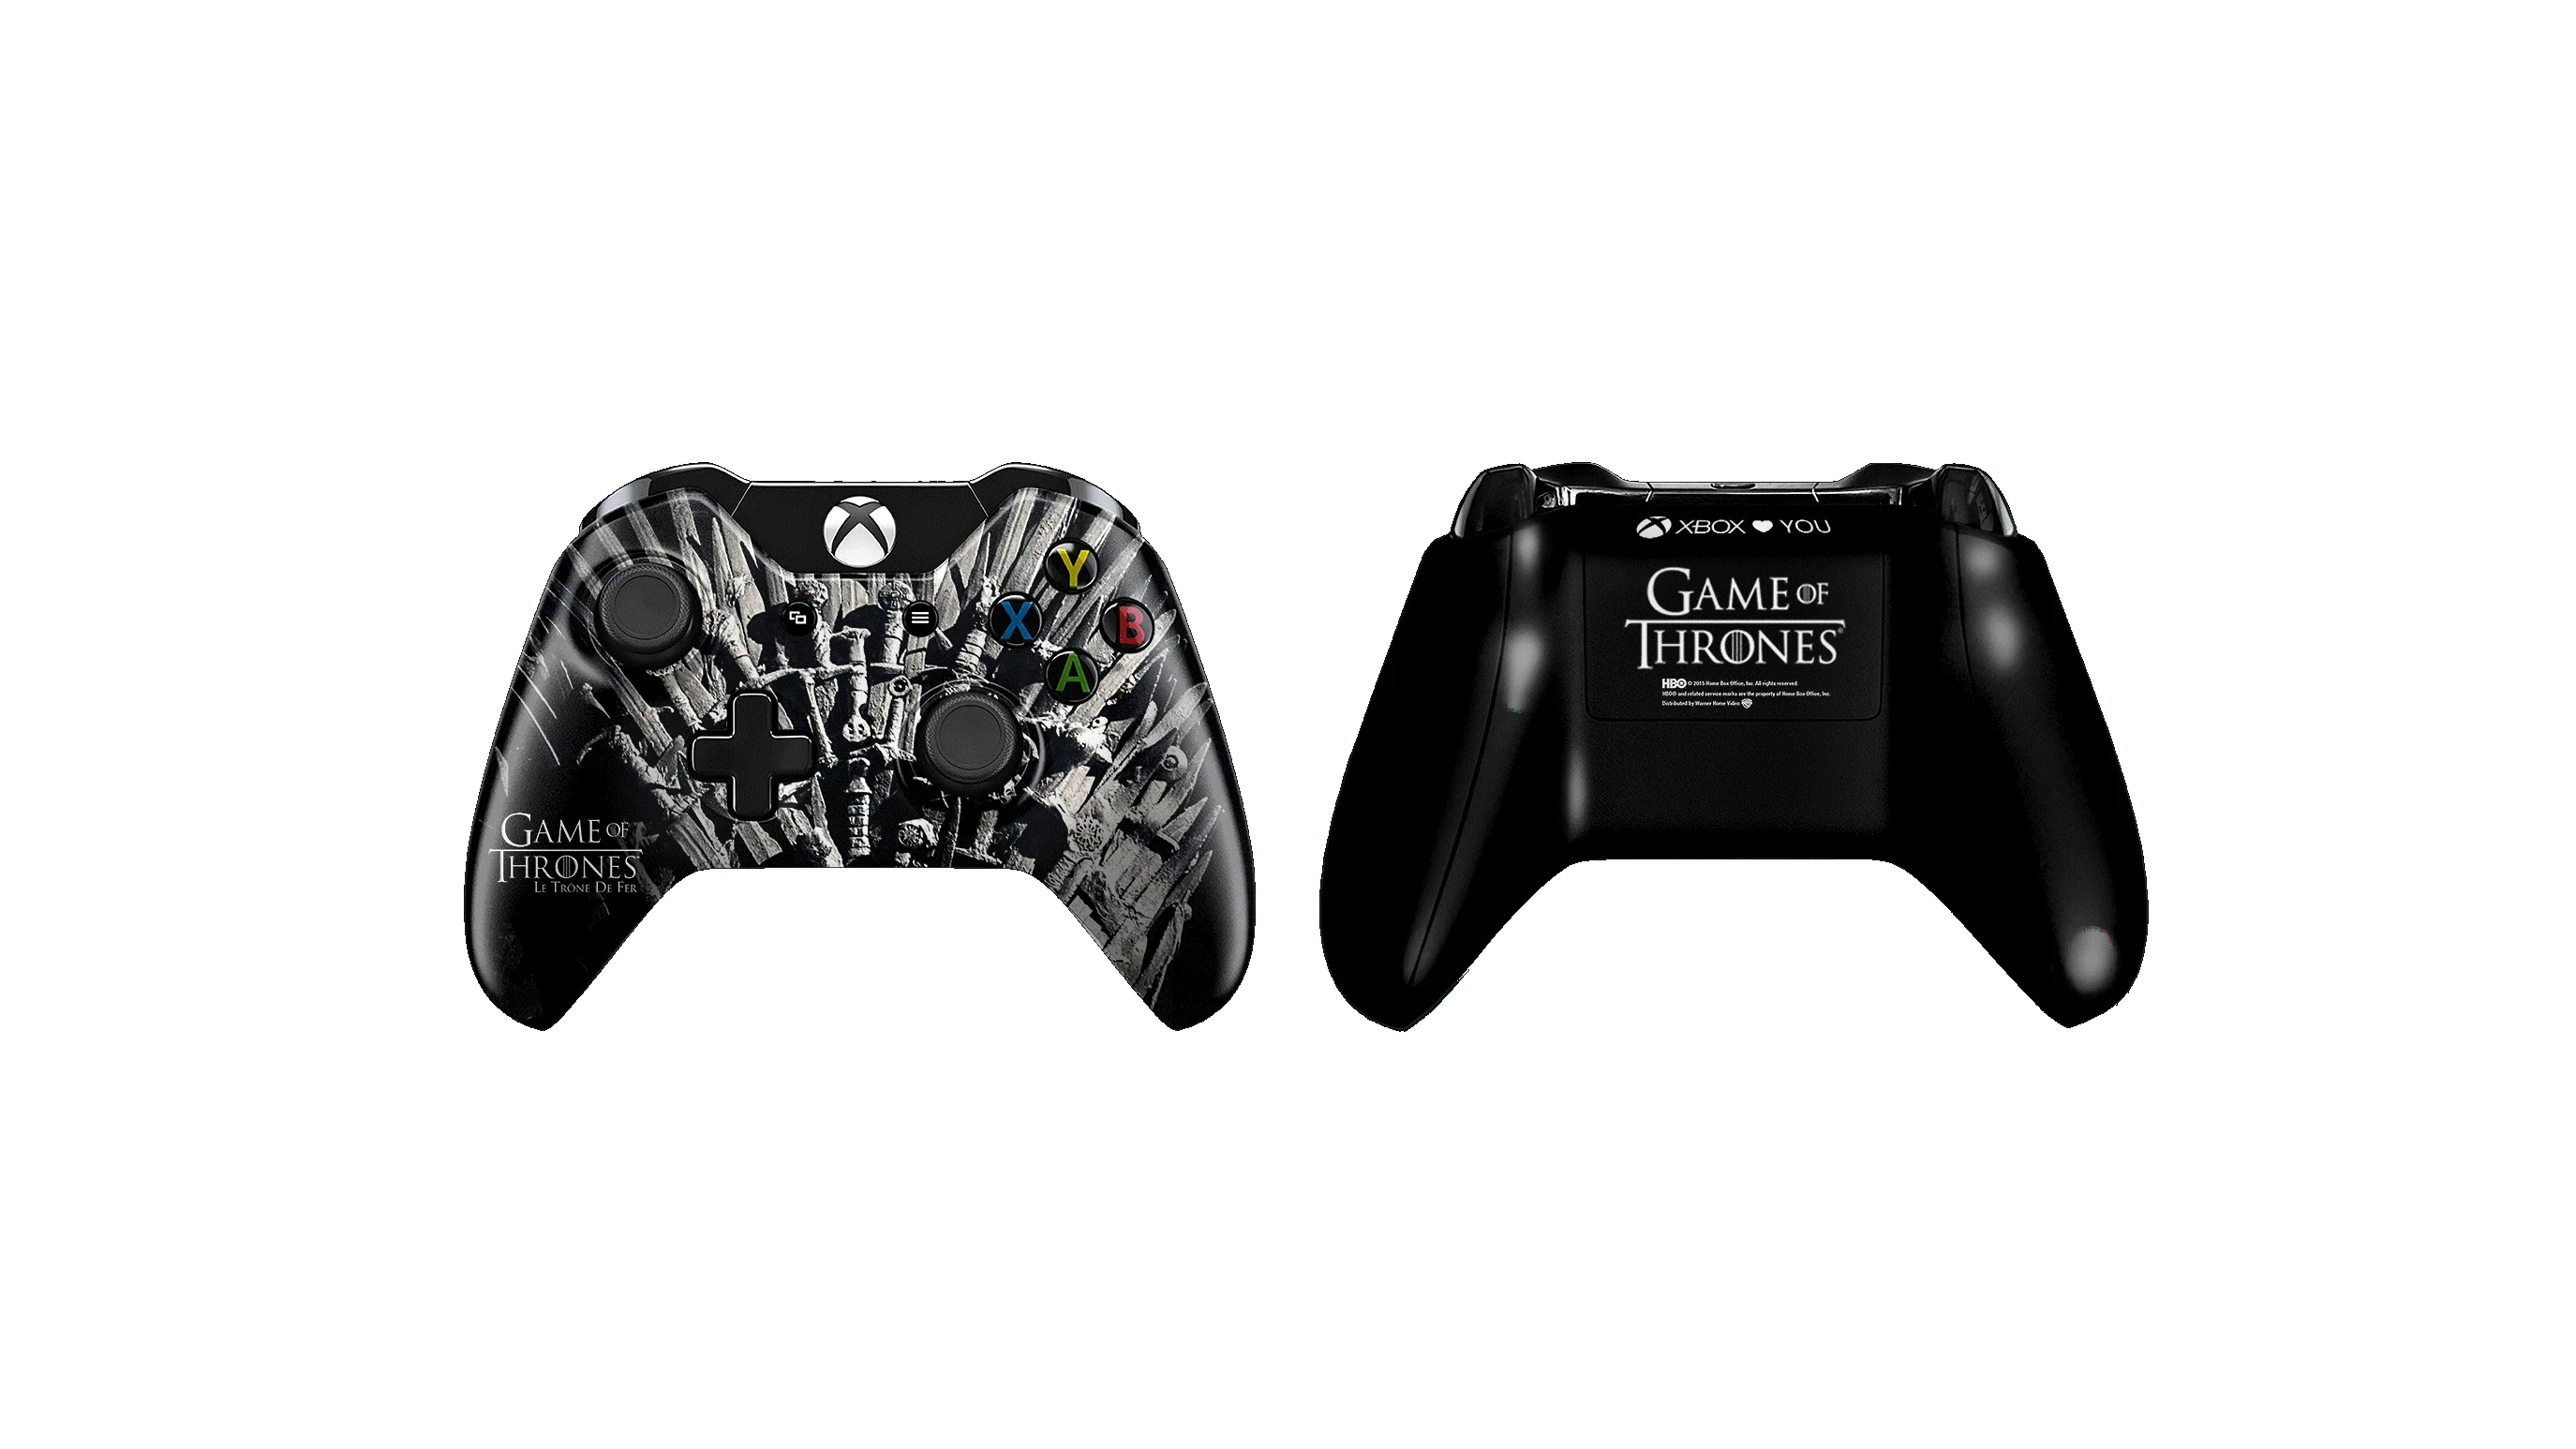  Microsoft Xbox One Games of Thrones Trône Controller